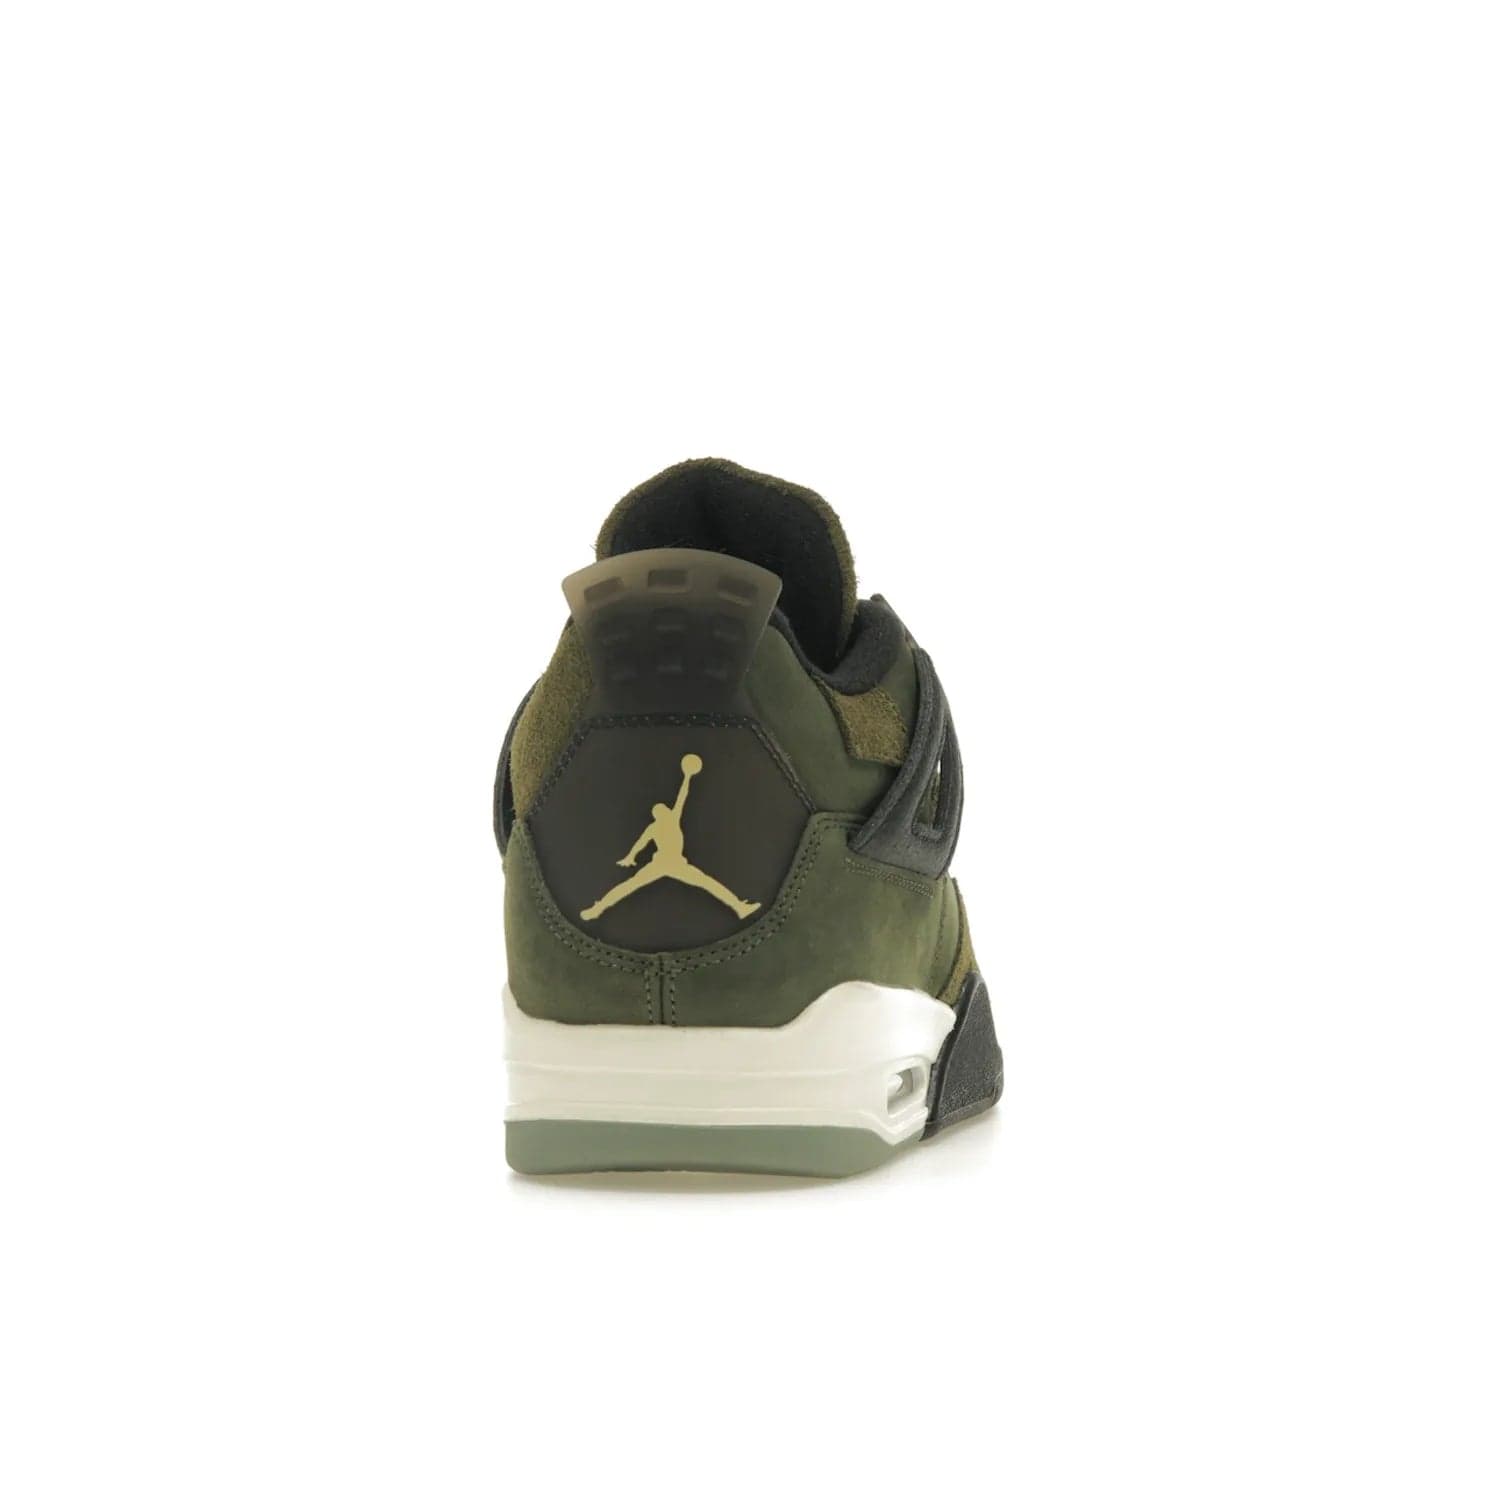 Jordan 4 Retro SE Craft Medium Olive - Image 29 - Only at www.BallersClubKickz.com - Grab the Jordan 4 Retro SE Crafts for a unique style. Combines Medium Olive, Pale Vanilla, Khaki, Black and Sail, with same classic shape, cushioning, and rubber outsole. Available on November 18th!